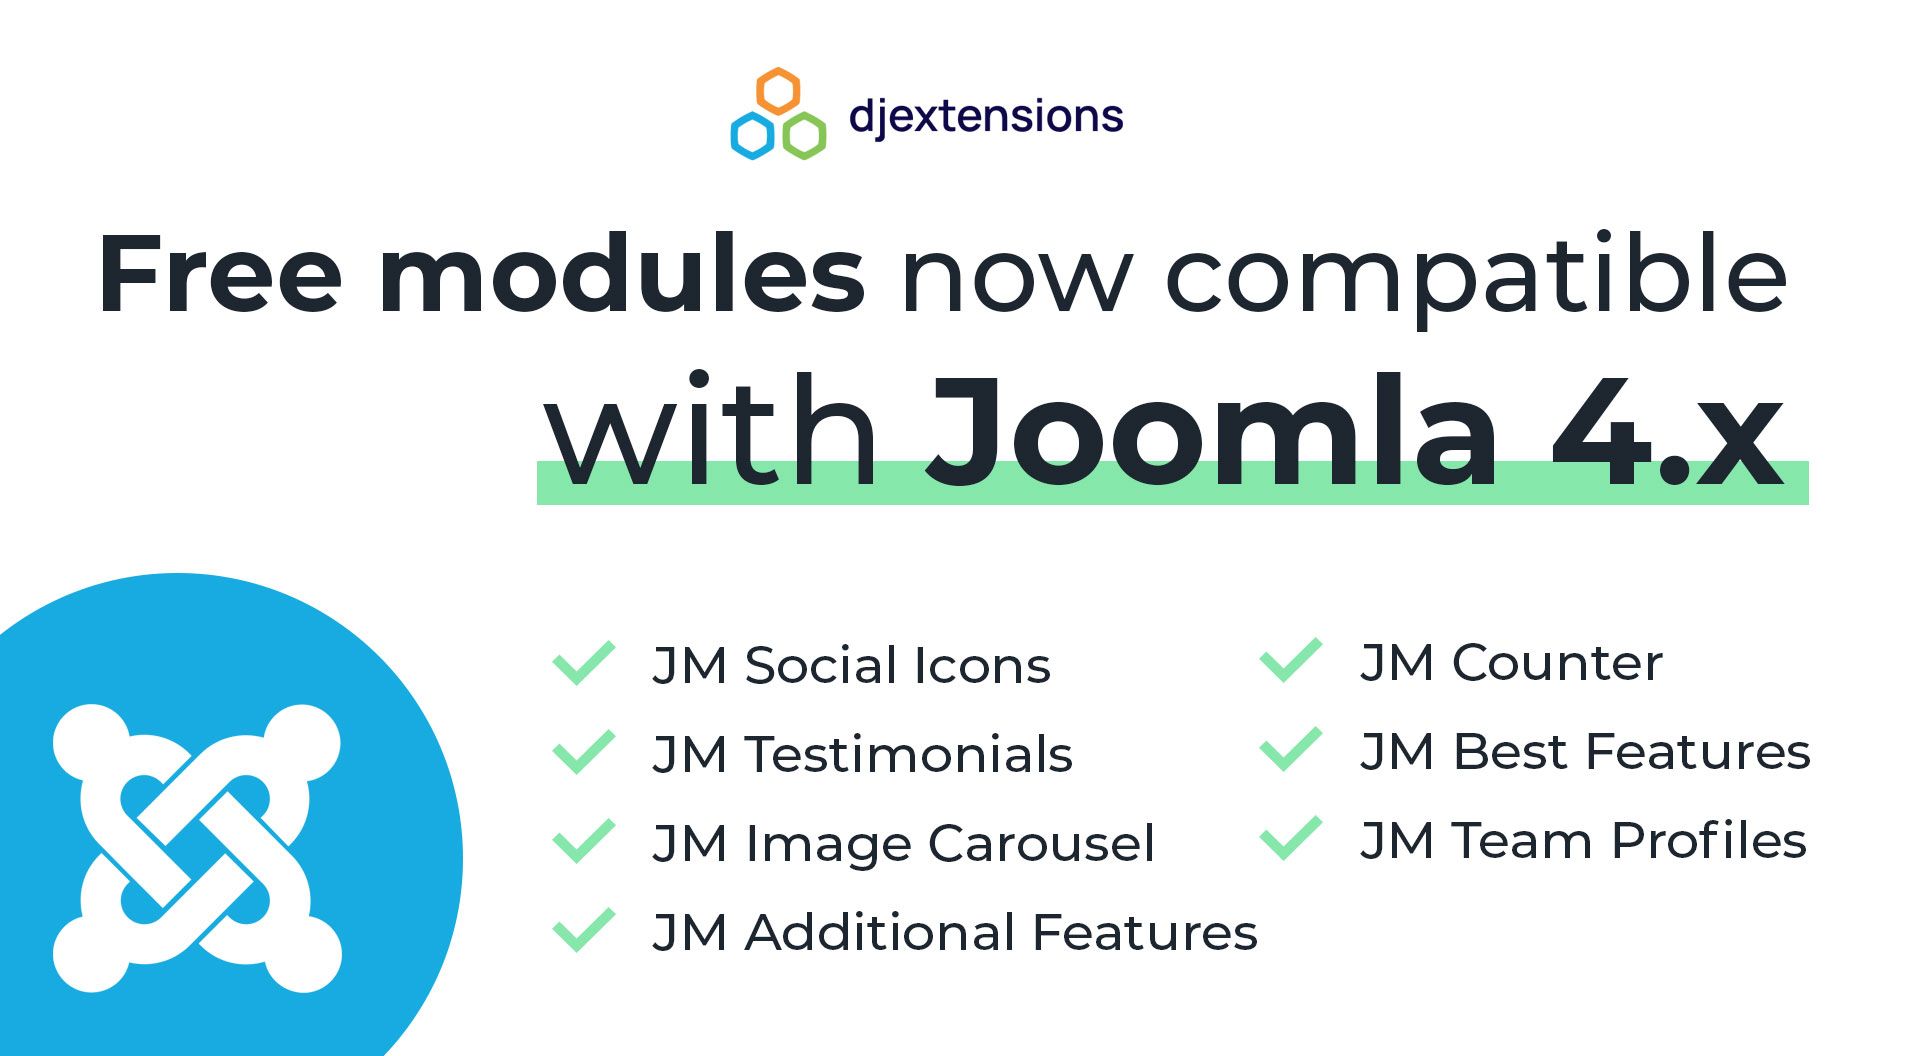 The update of free modules introduces compatibility with Joomla 4.x